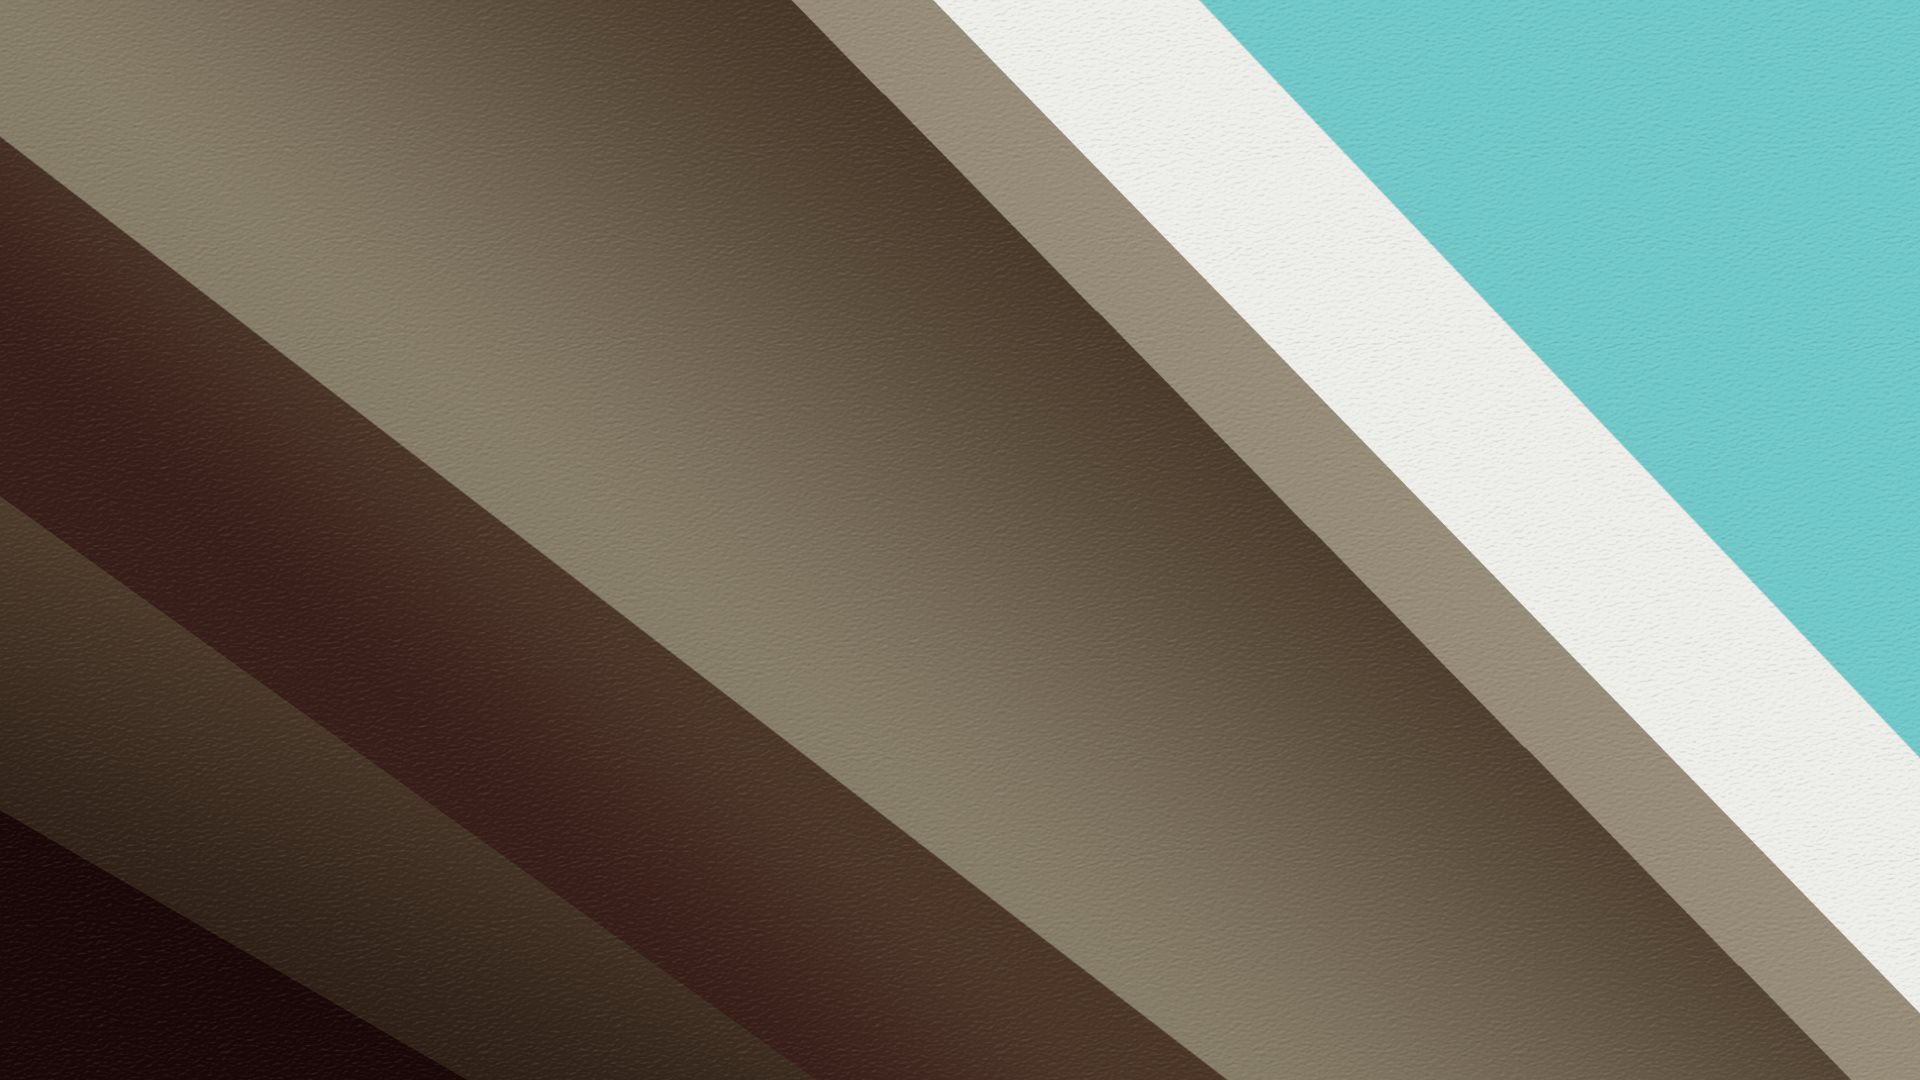 Android L Os Developed By Google I Didn T Seen Any Wallpaper From